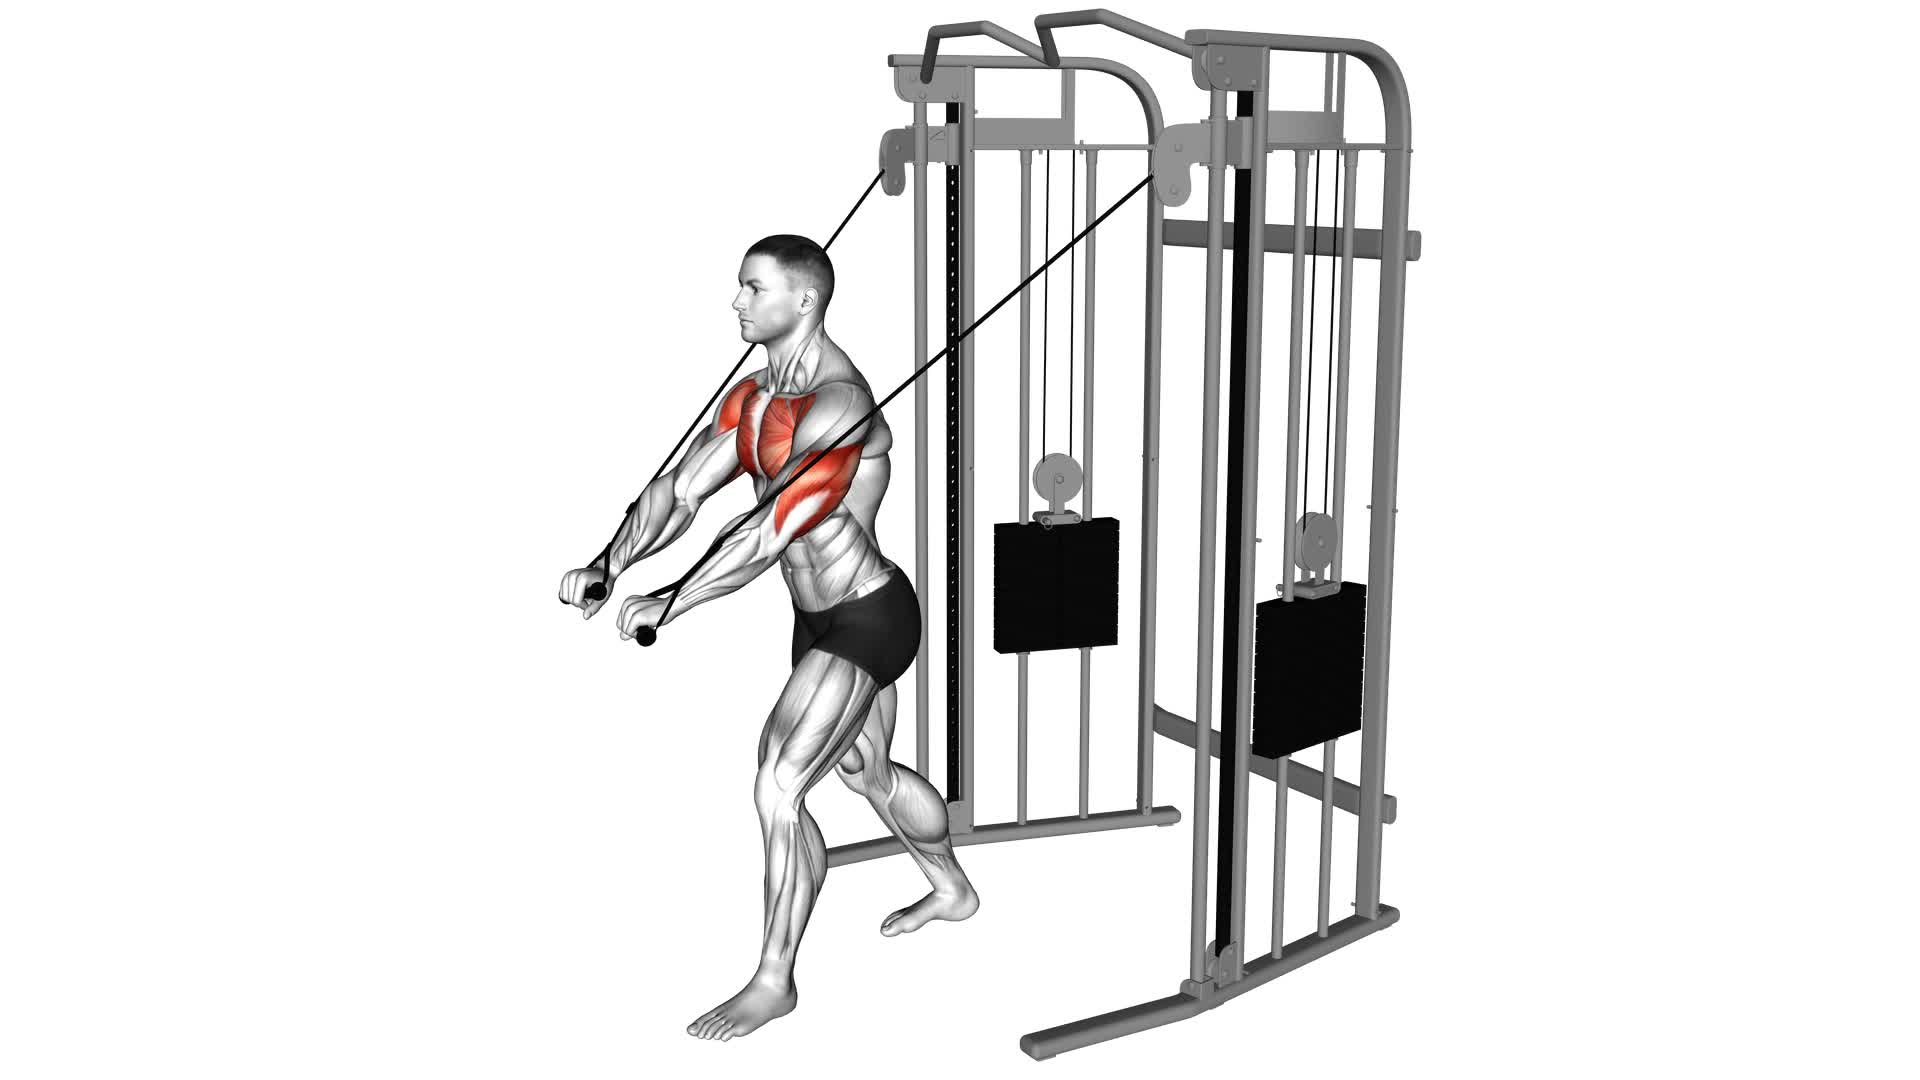 Cable Low Chest Press (male) - Video Exercise Guide & Tips